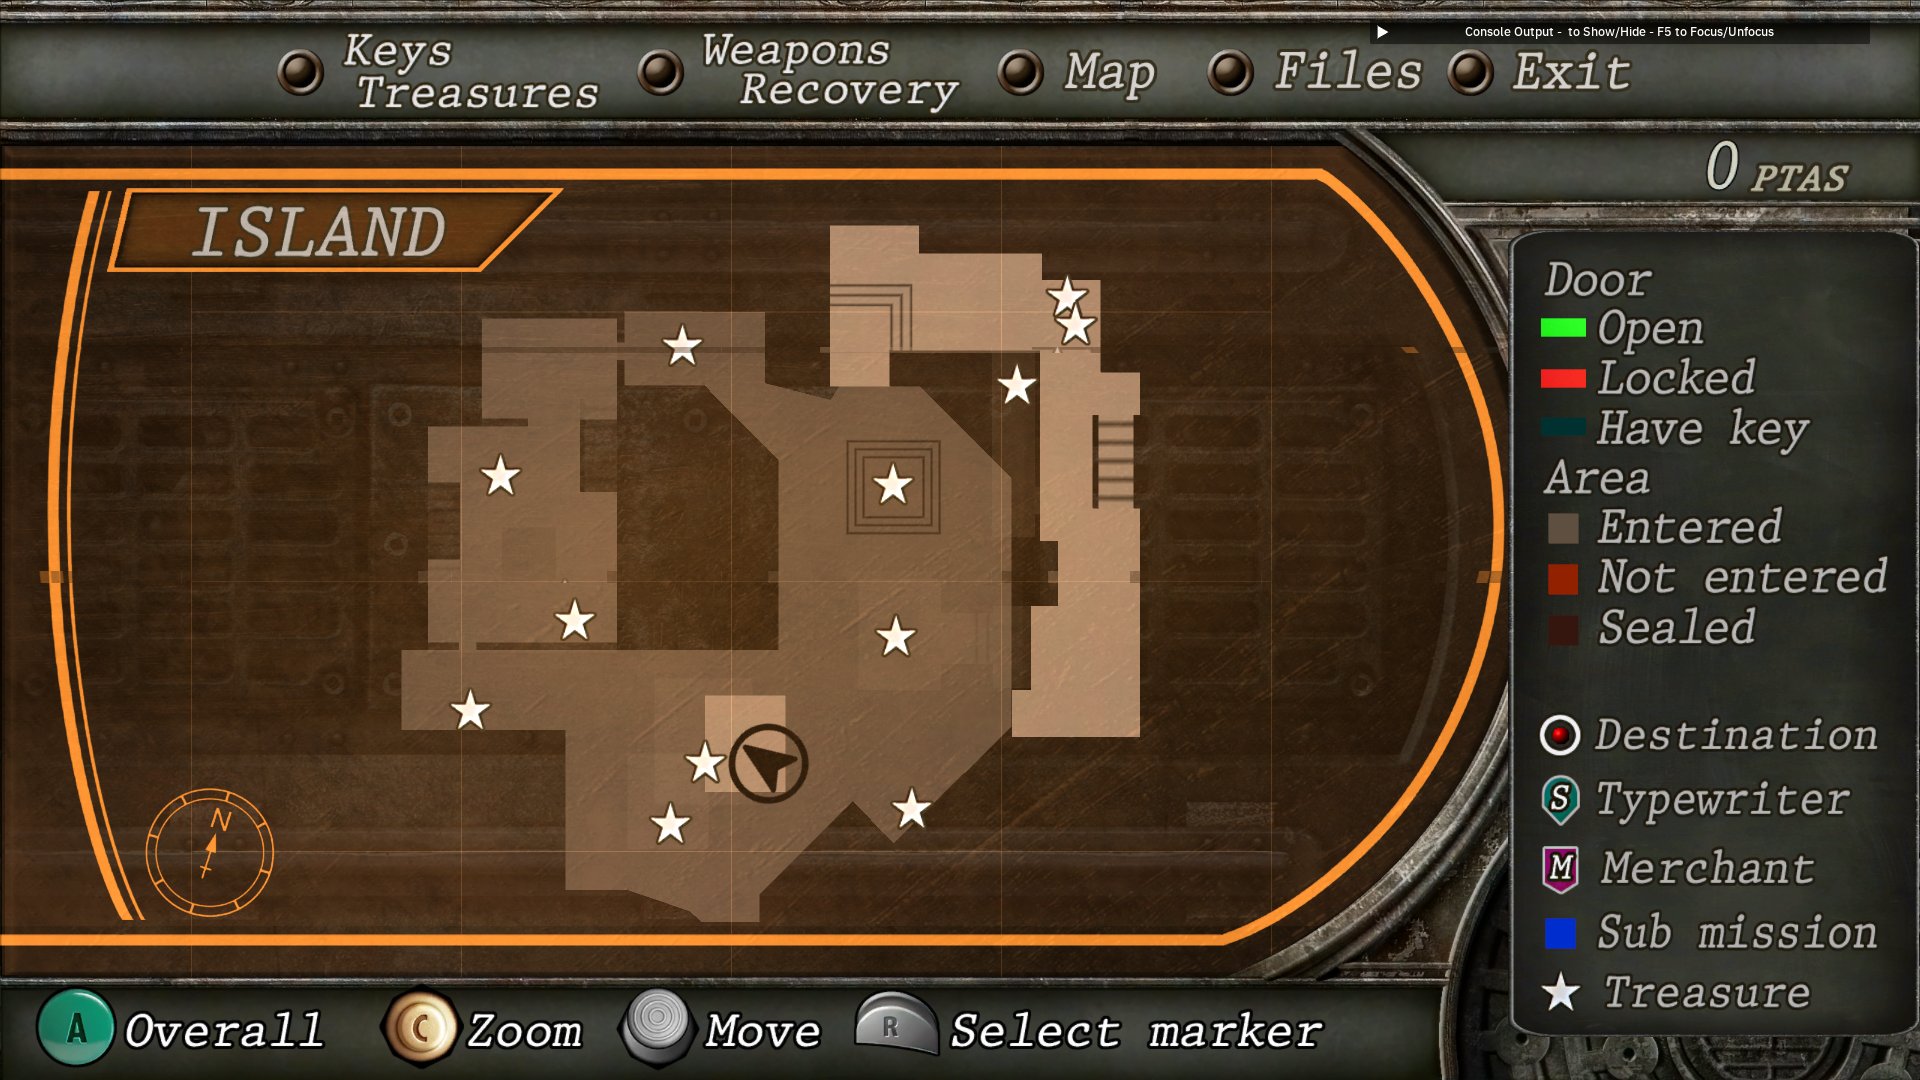 Resident Evil 4 Save File Location & Config File Location - EaseUS